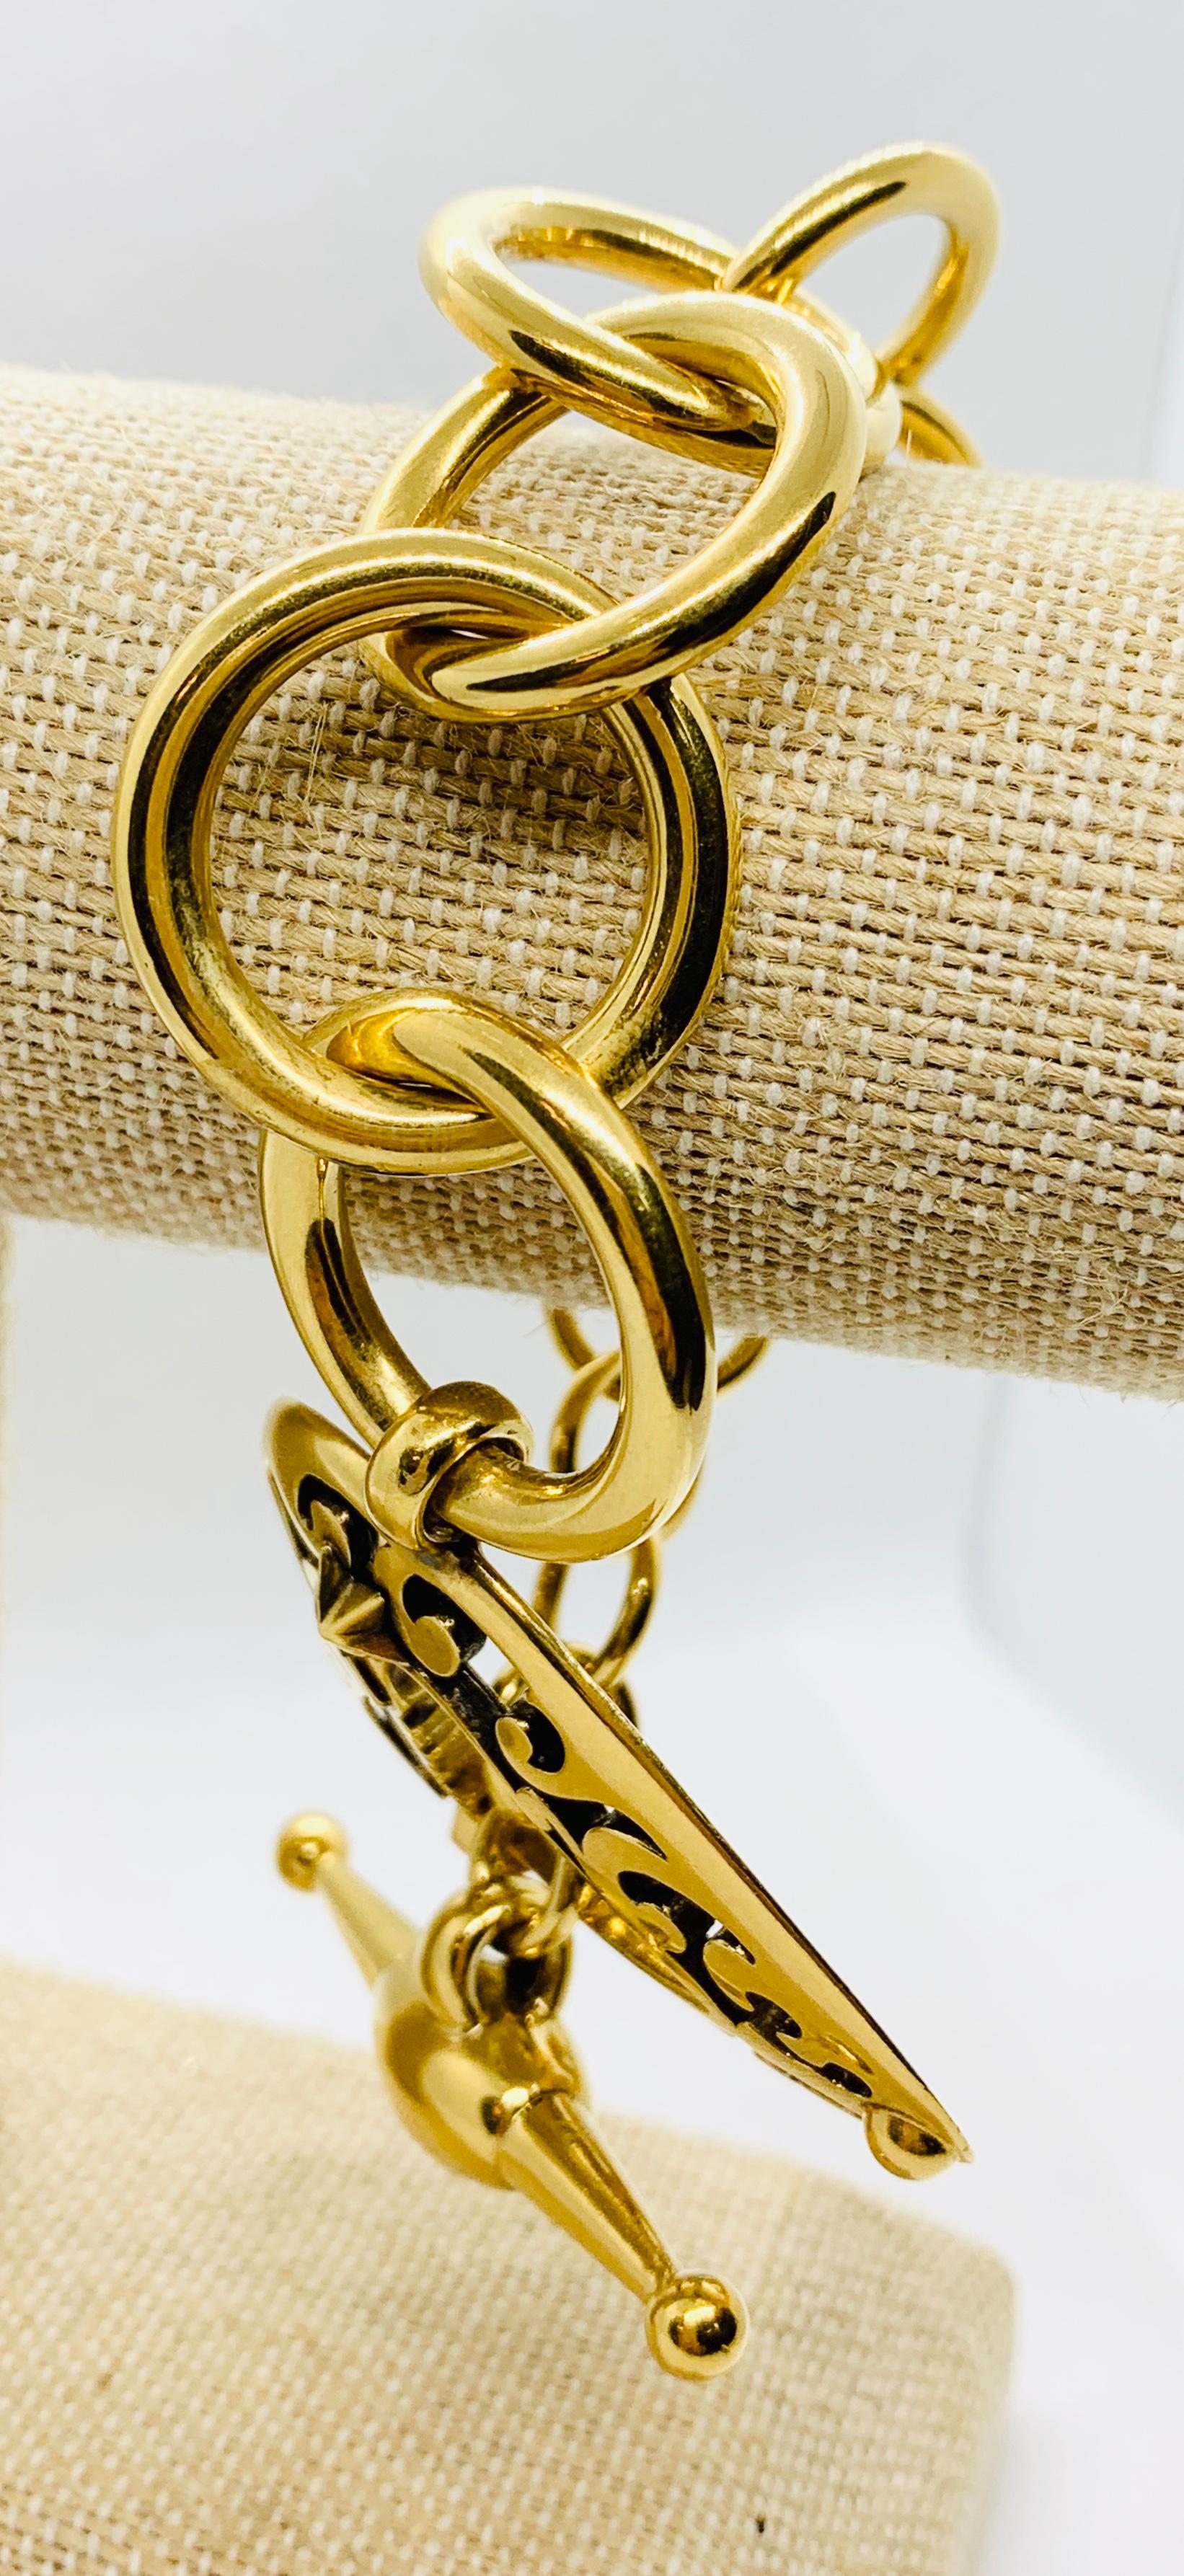 Gucci 18 Karat Gold Link Bracelet with Toggle Clasp & Heart Shaped Center Piece 8